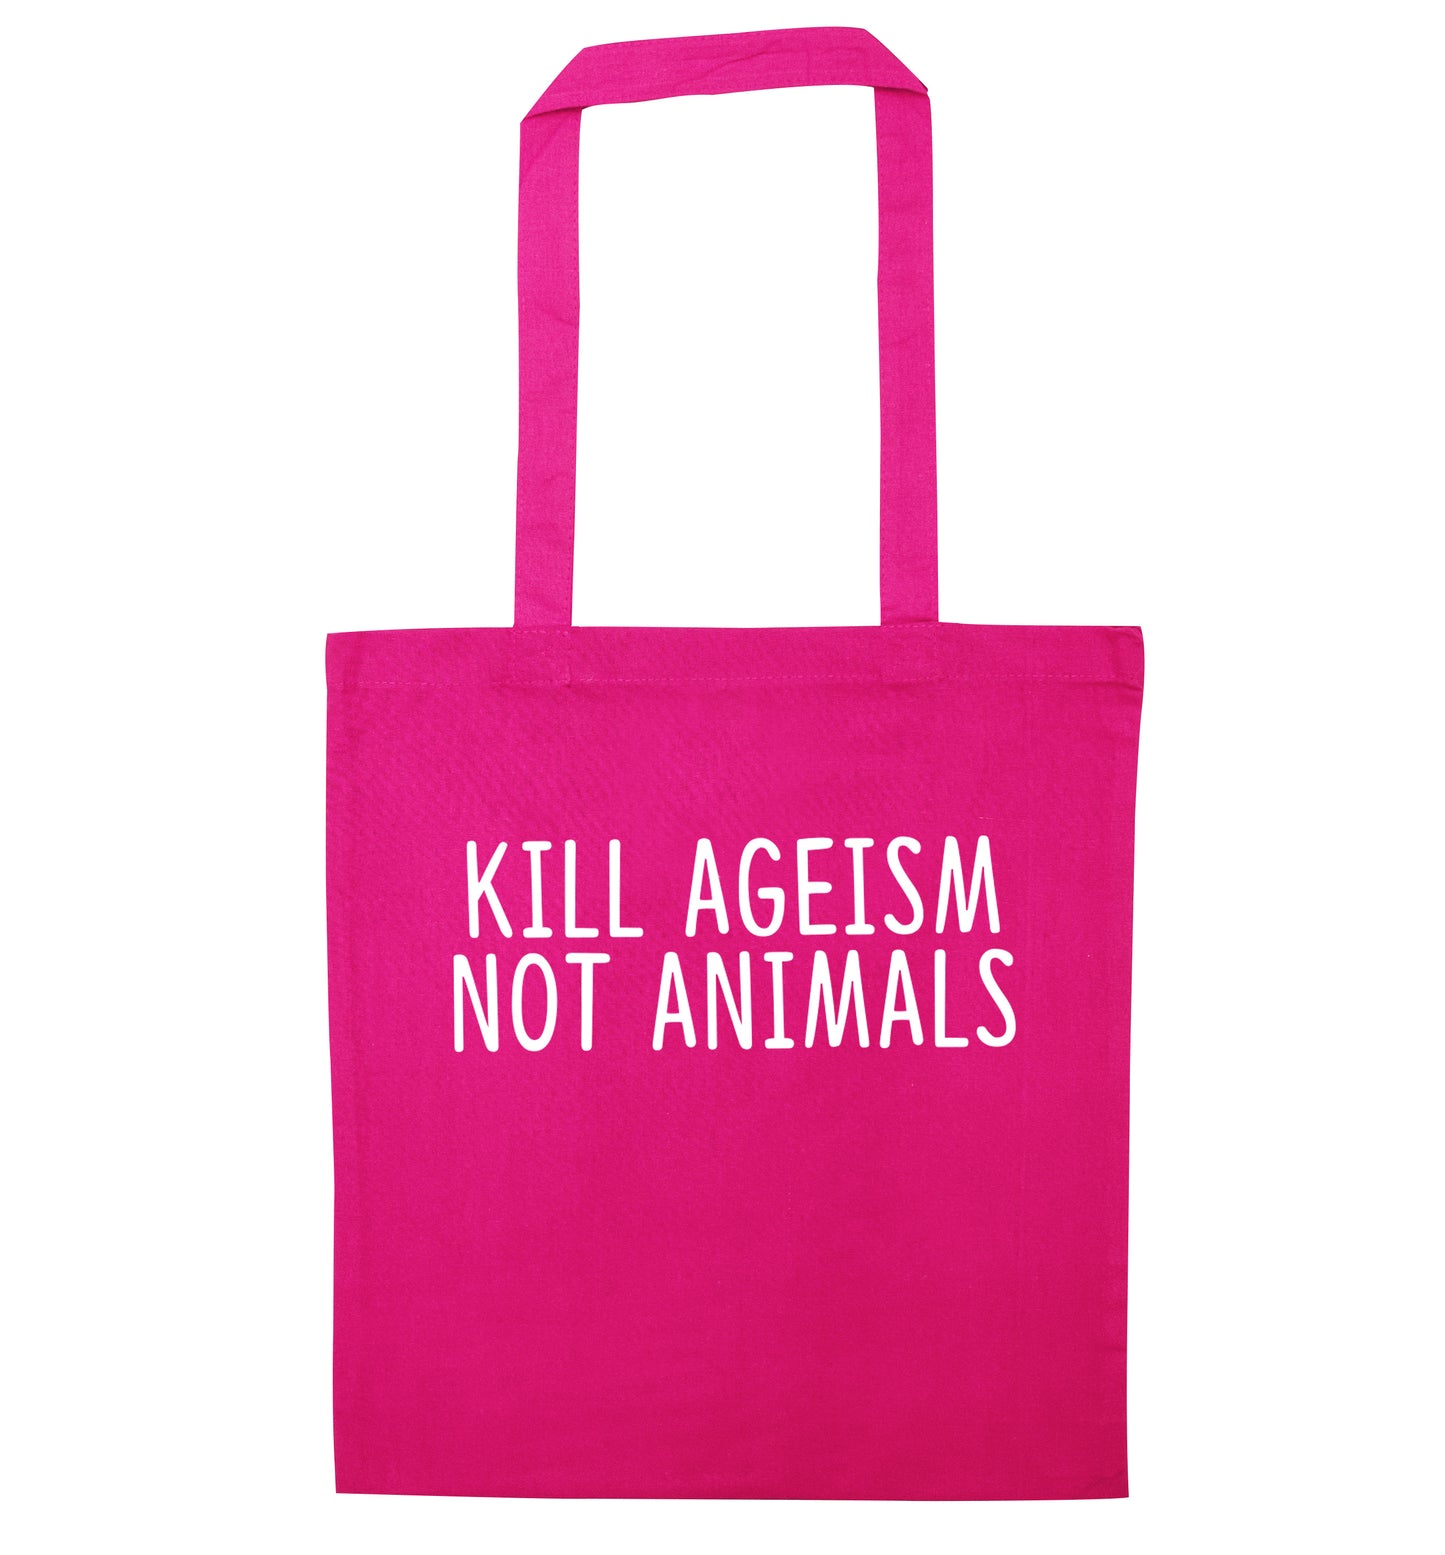 Kill Ageism Not Animals pink tote bag